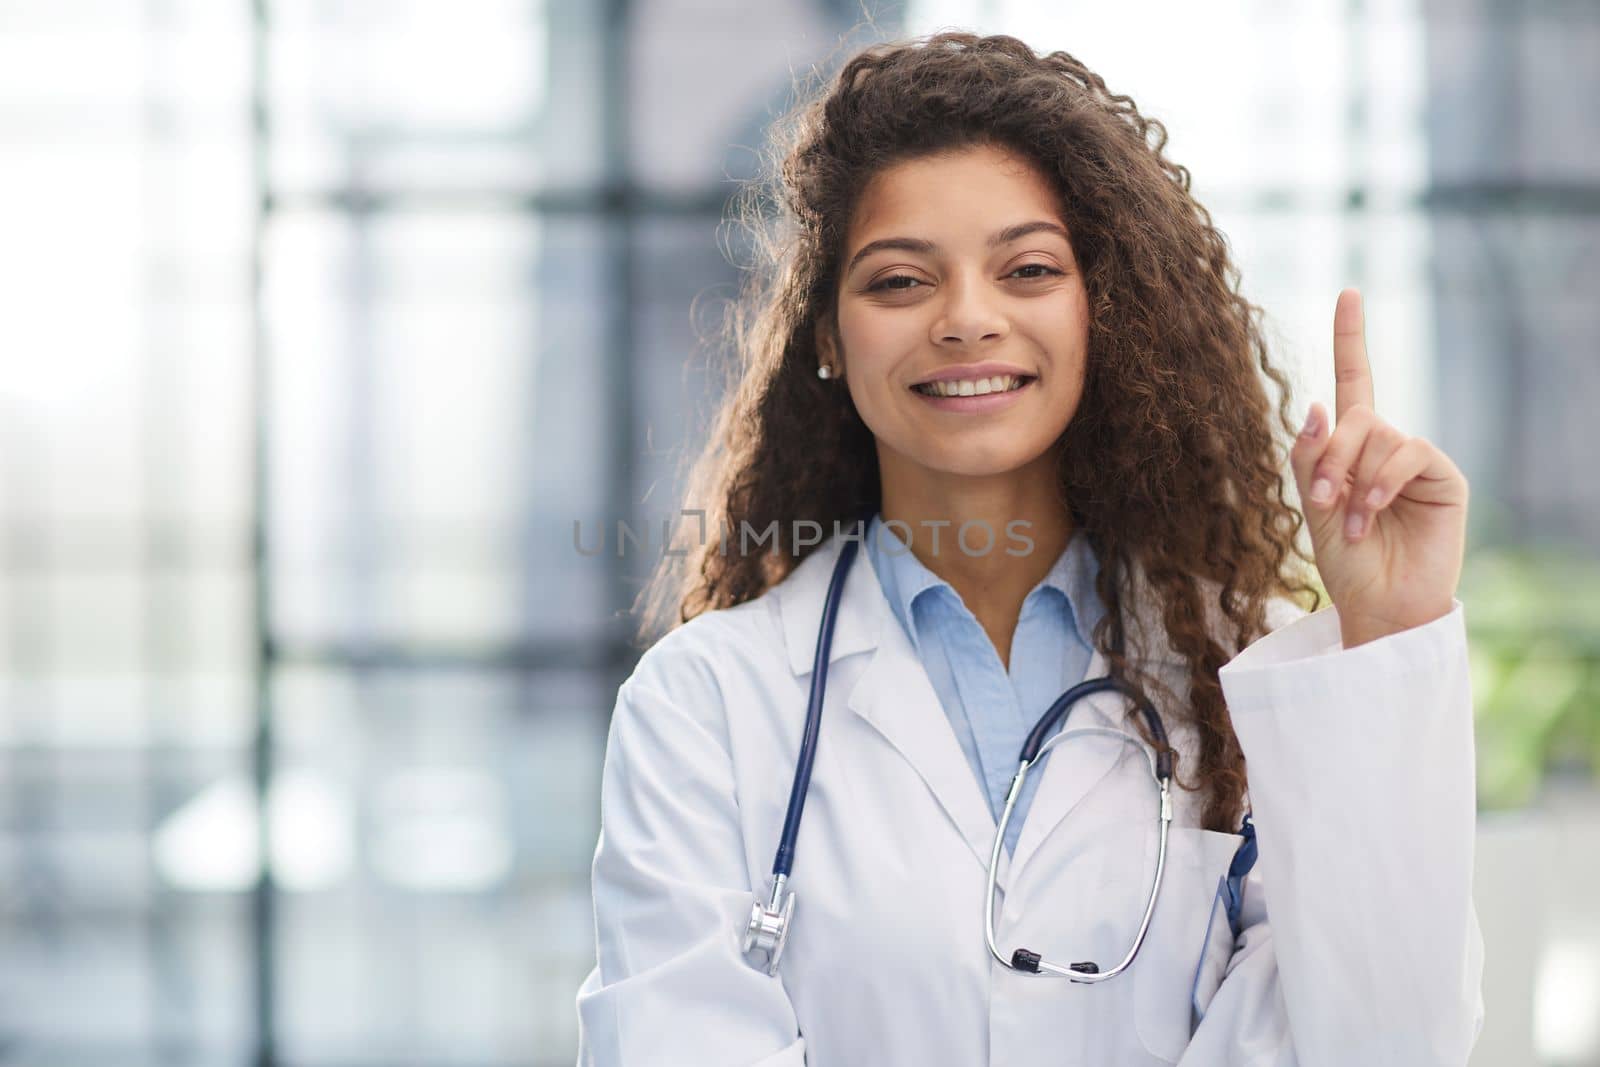 Portrait of an attractive young female doctor in a white coat points her finger